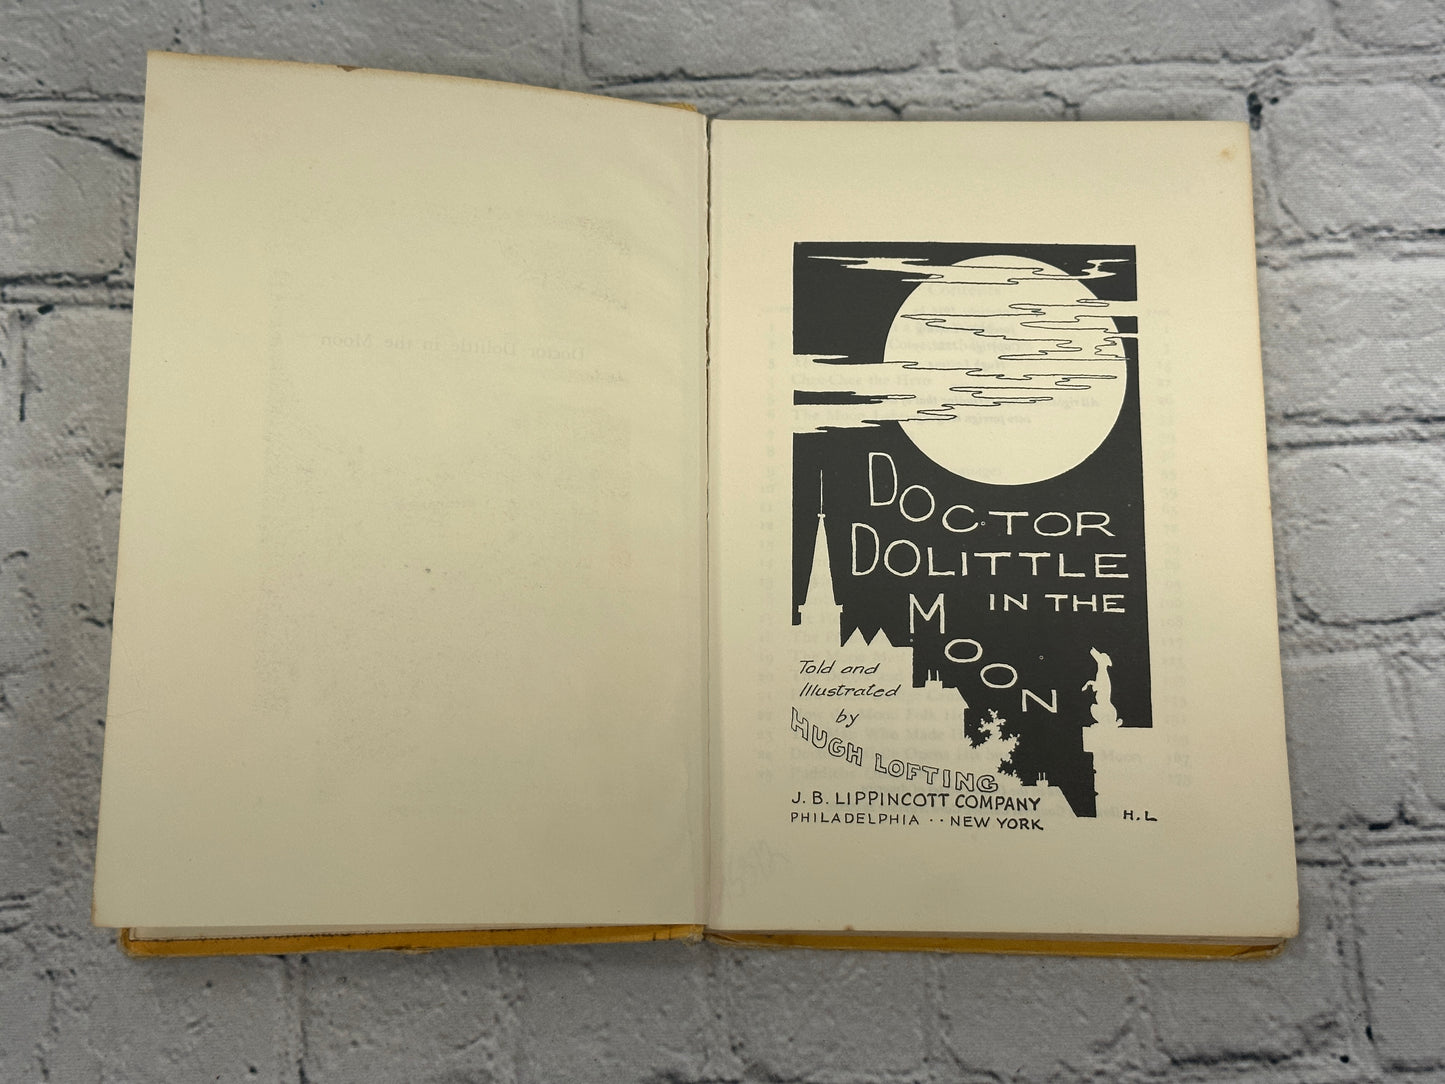 Doctor Dolittle In The Moon by Hugh Lofting [1956]